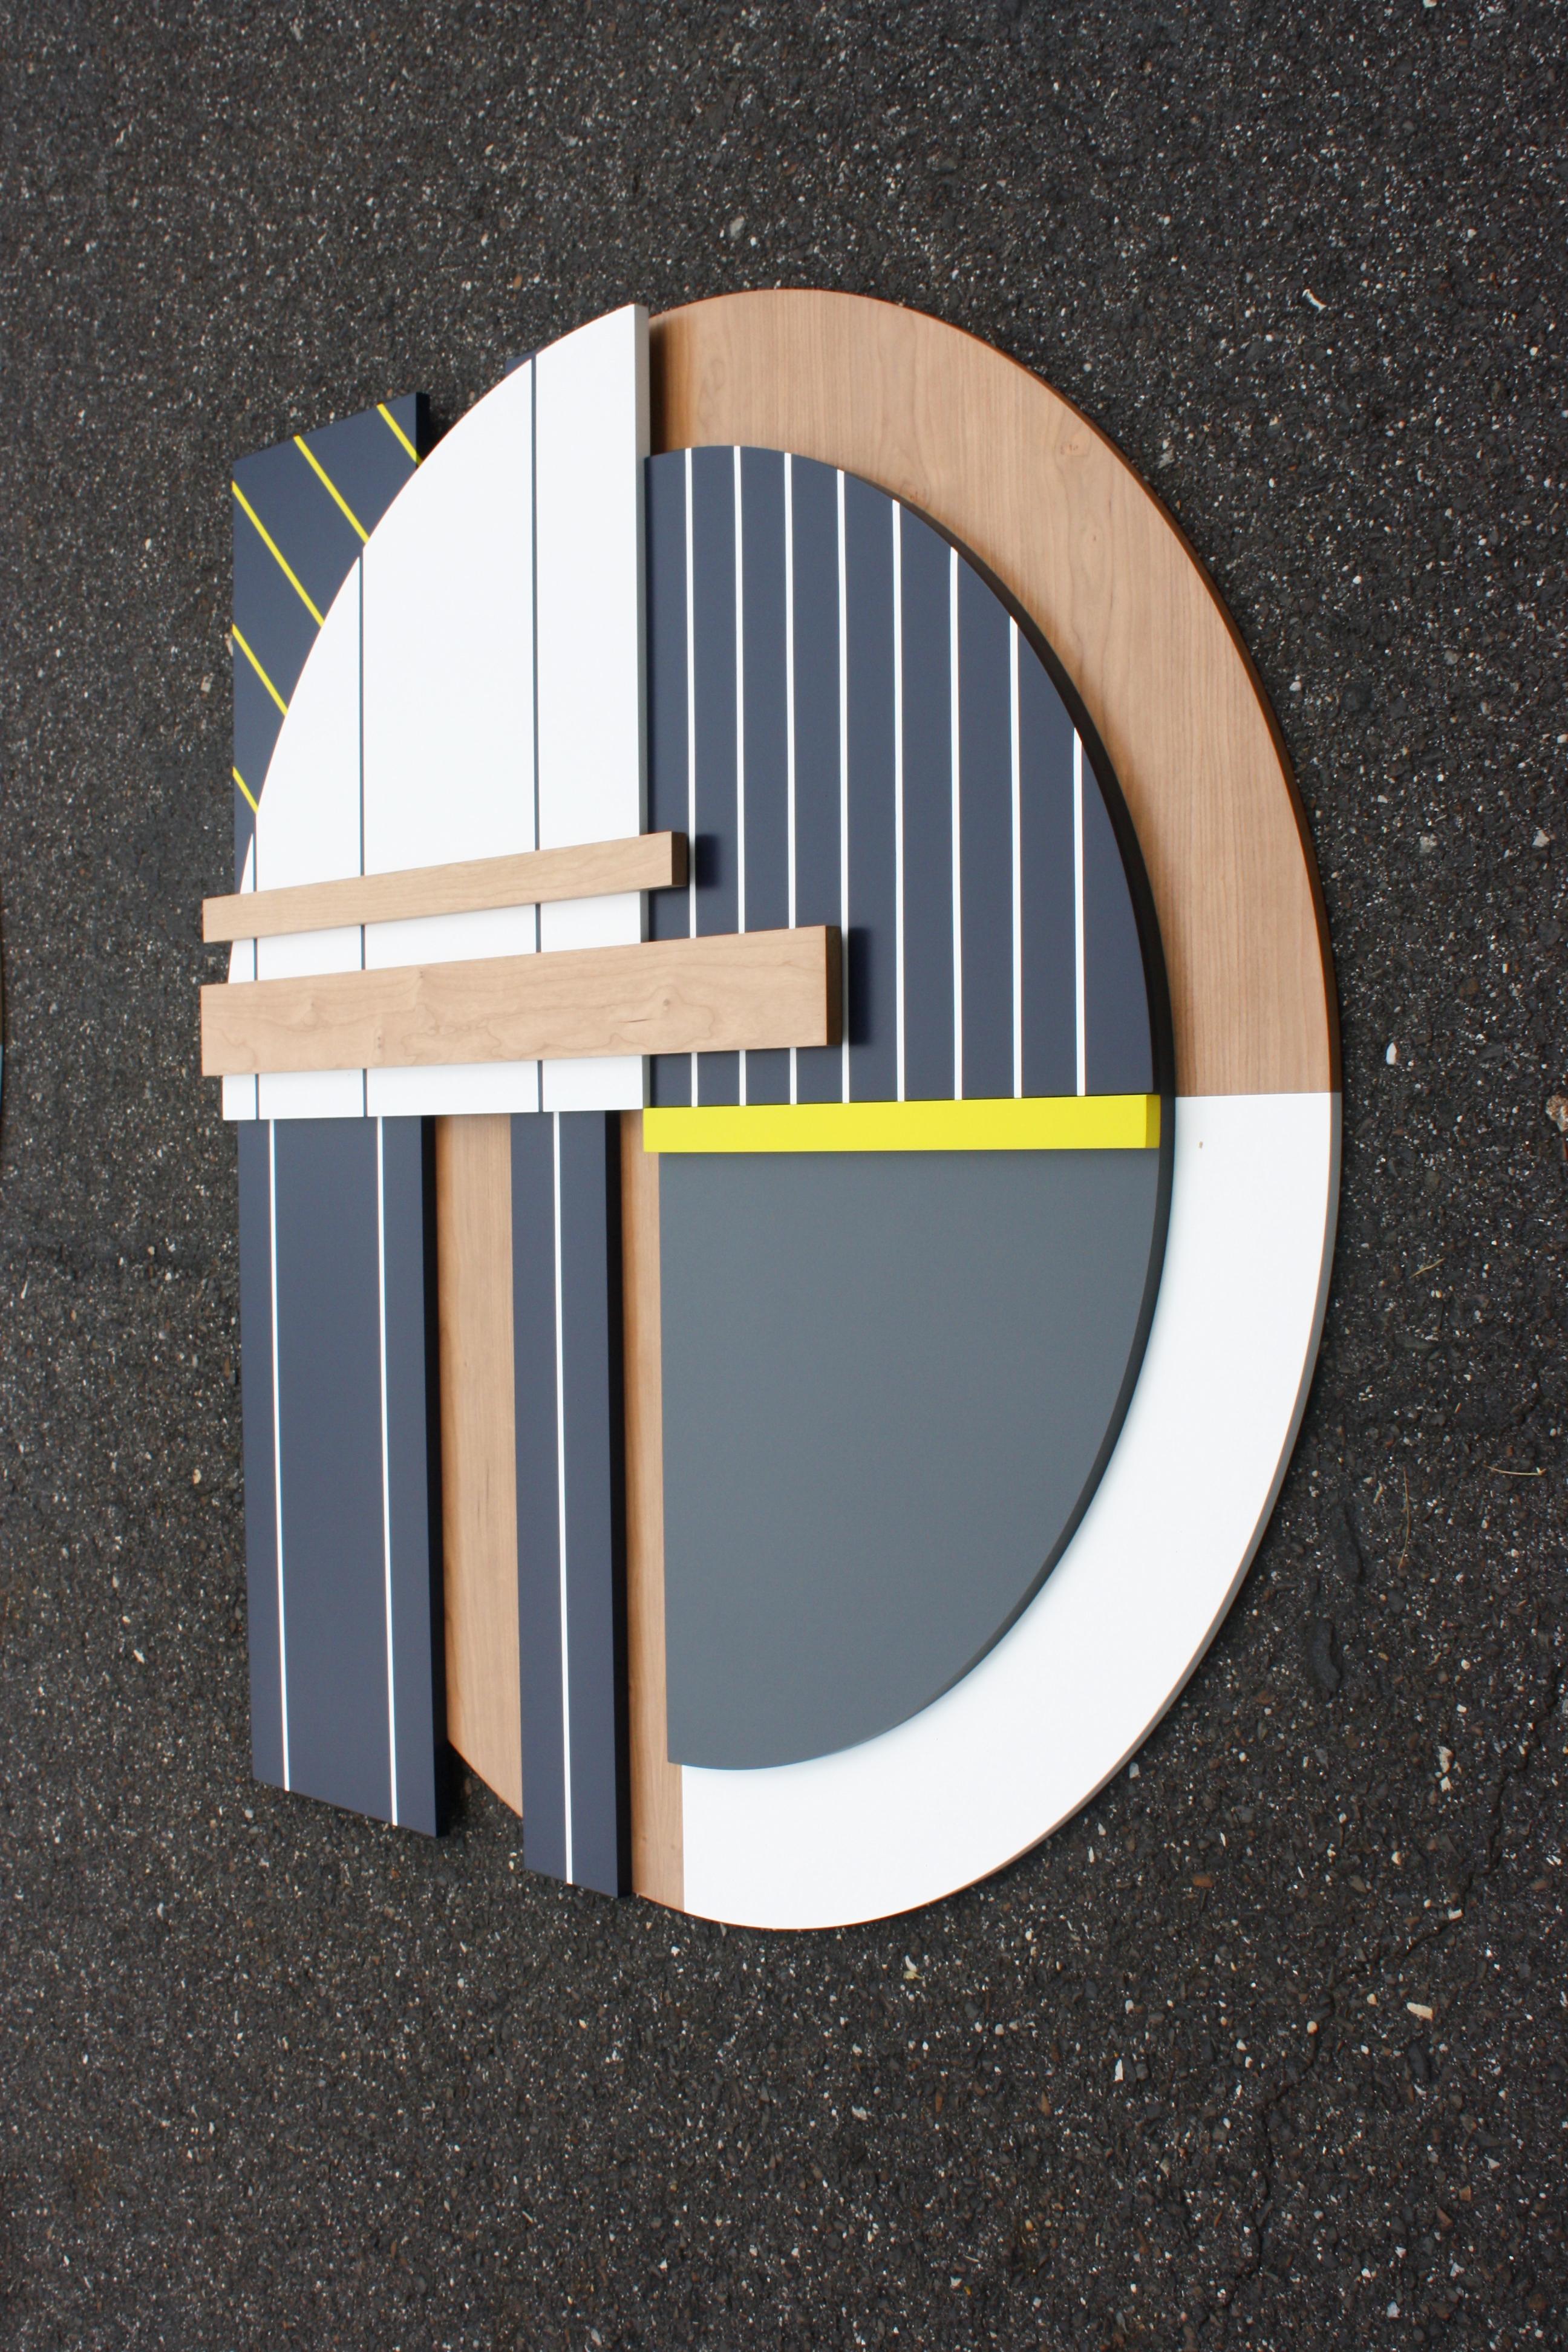 Bauhaus Navy is an elegant modern minimalist contemporary wall sculpture. It is constructed with birch panels, and high end pigmented lacquer with a satin finish. The piece relies on a minimalist color palette that is subtle and refined. Scott was